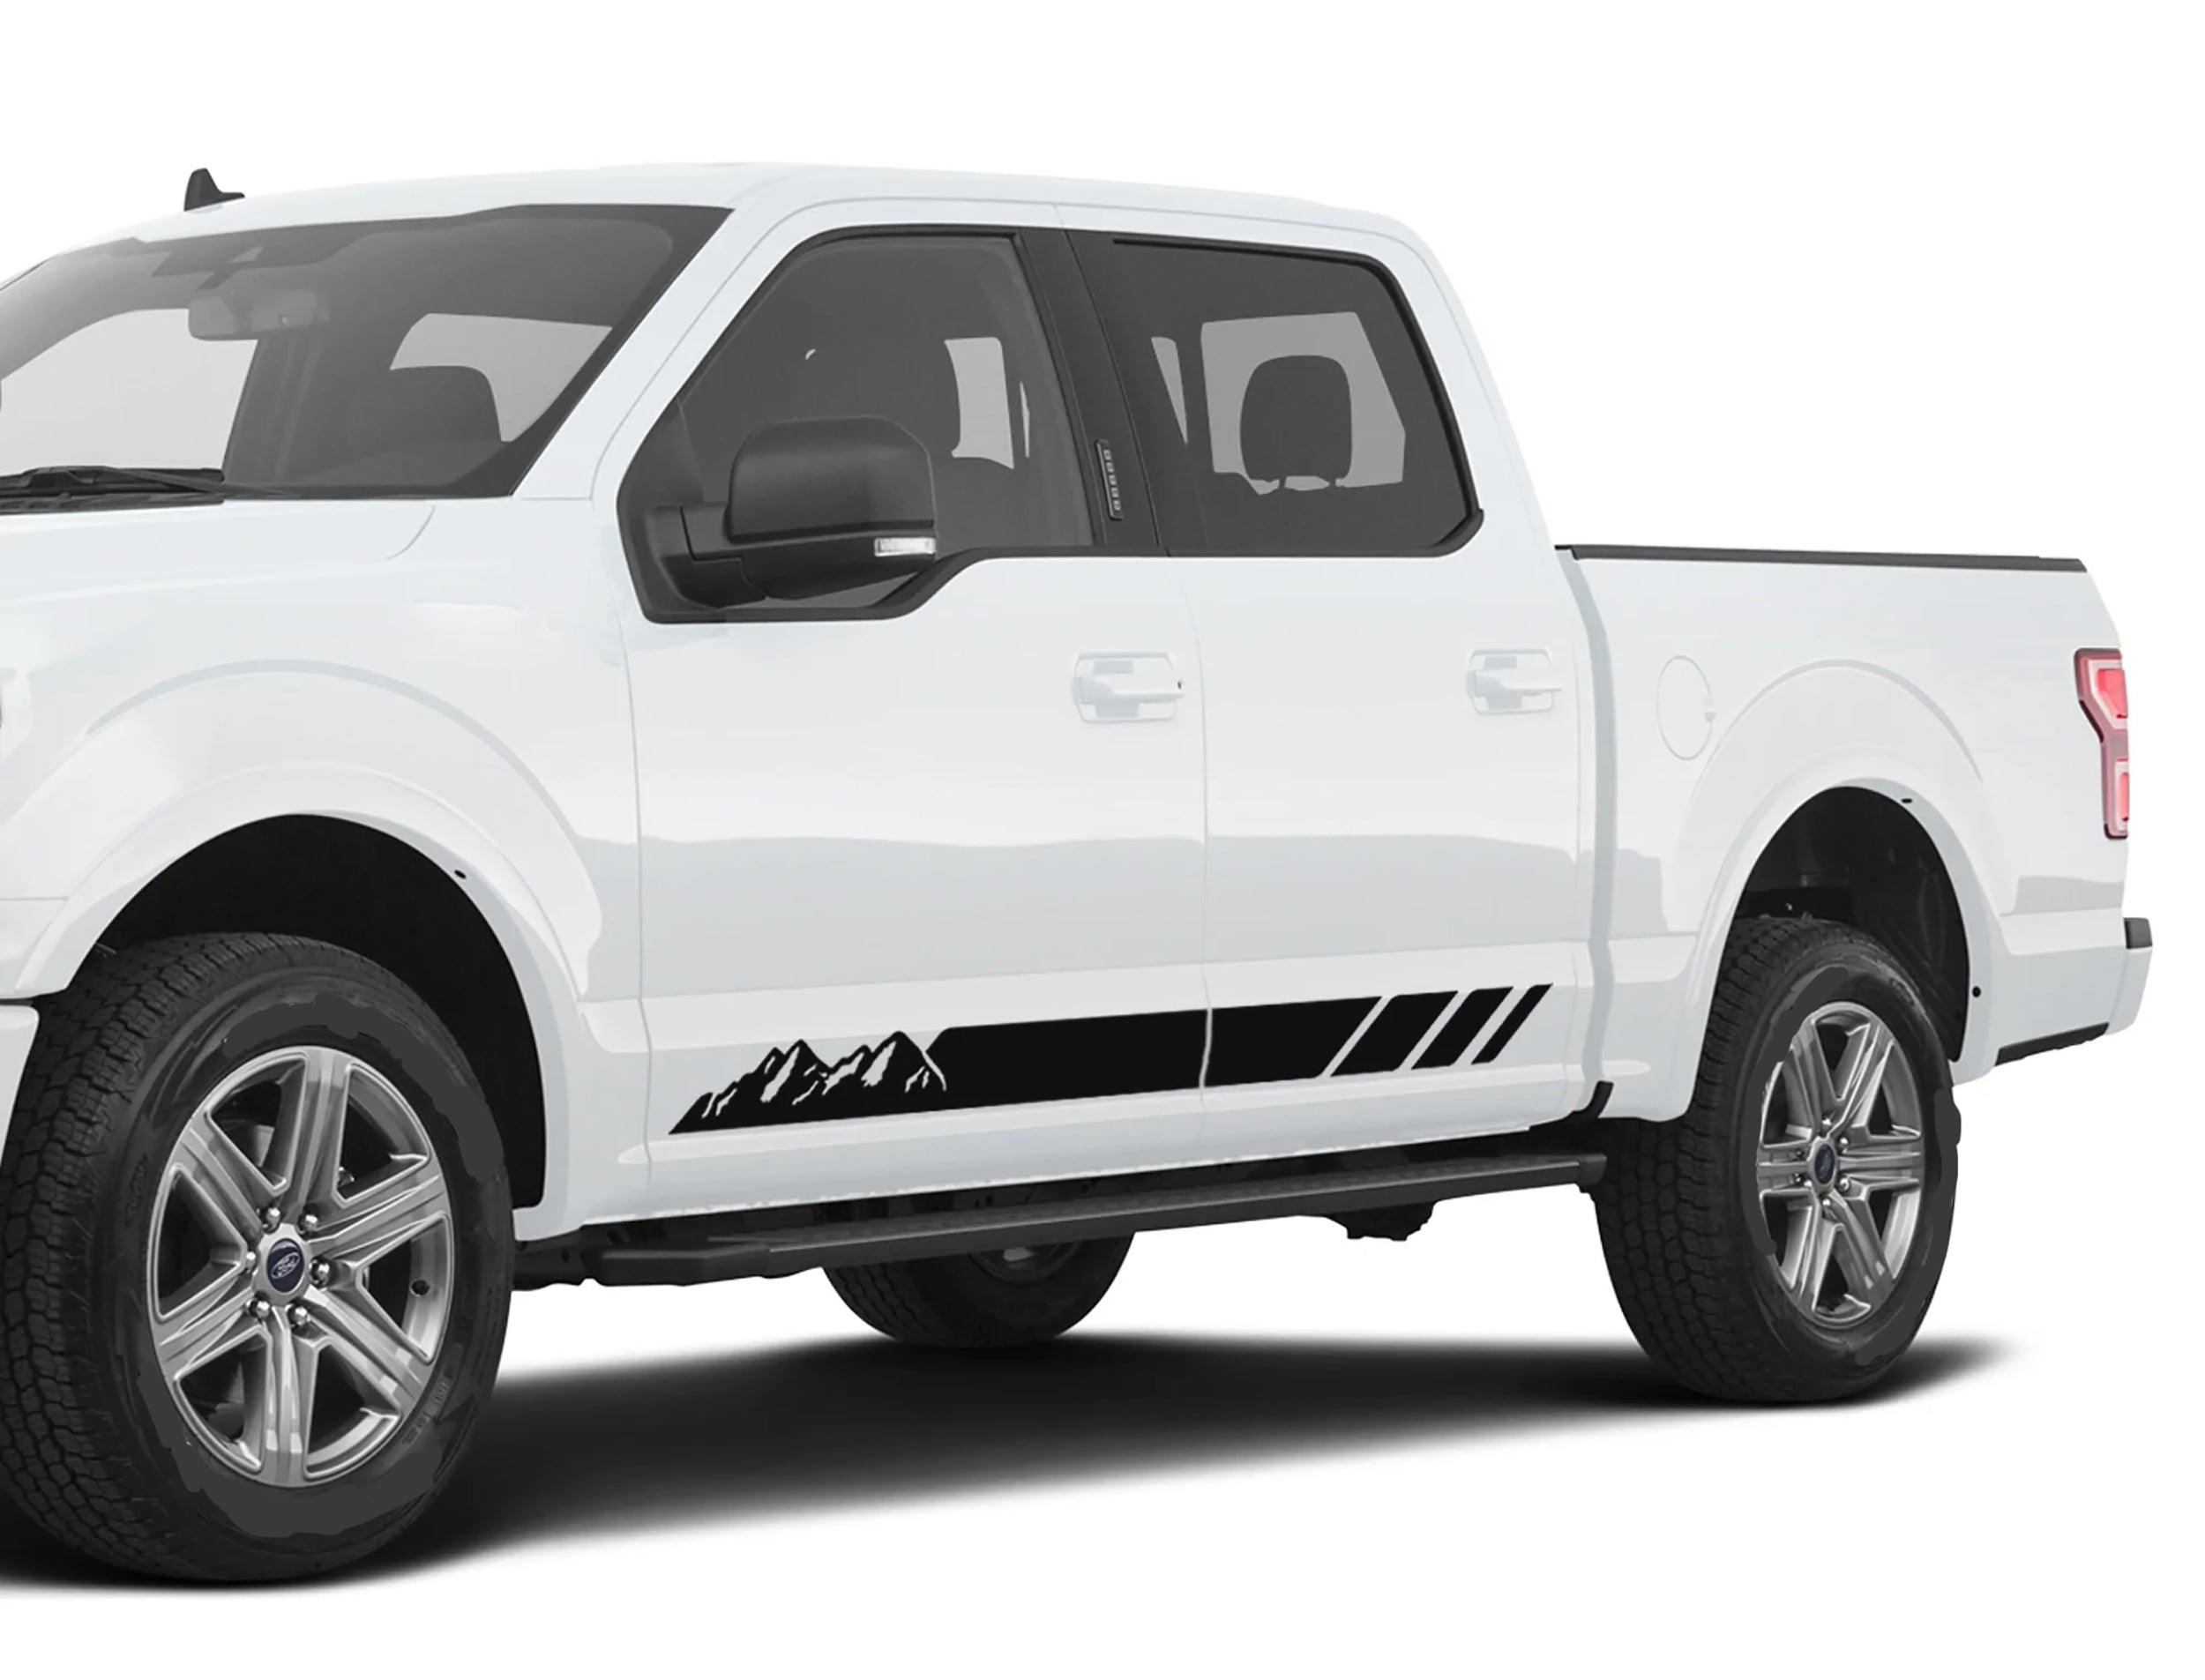 Ford F-150 Mountains Rocker Stripe Decals (Pair) : Vinyl Graphics Kit Fits (2015-2020)